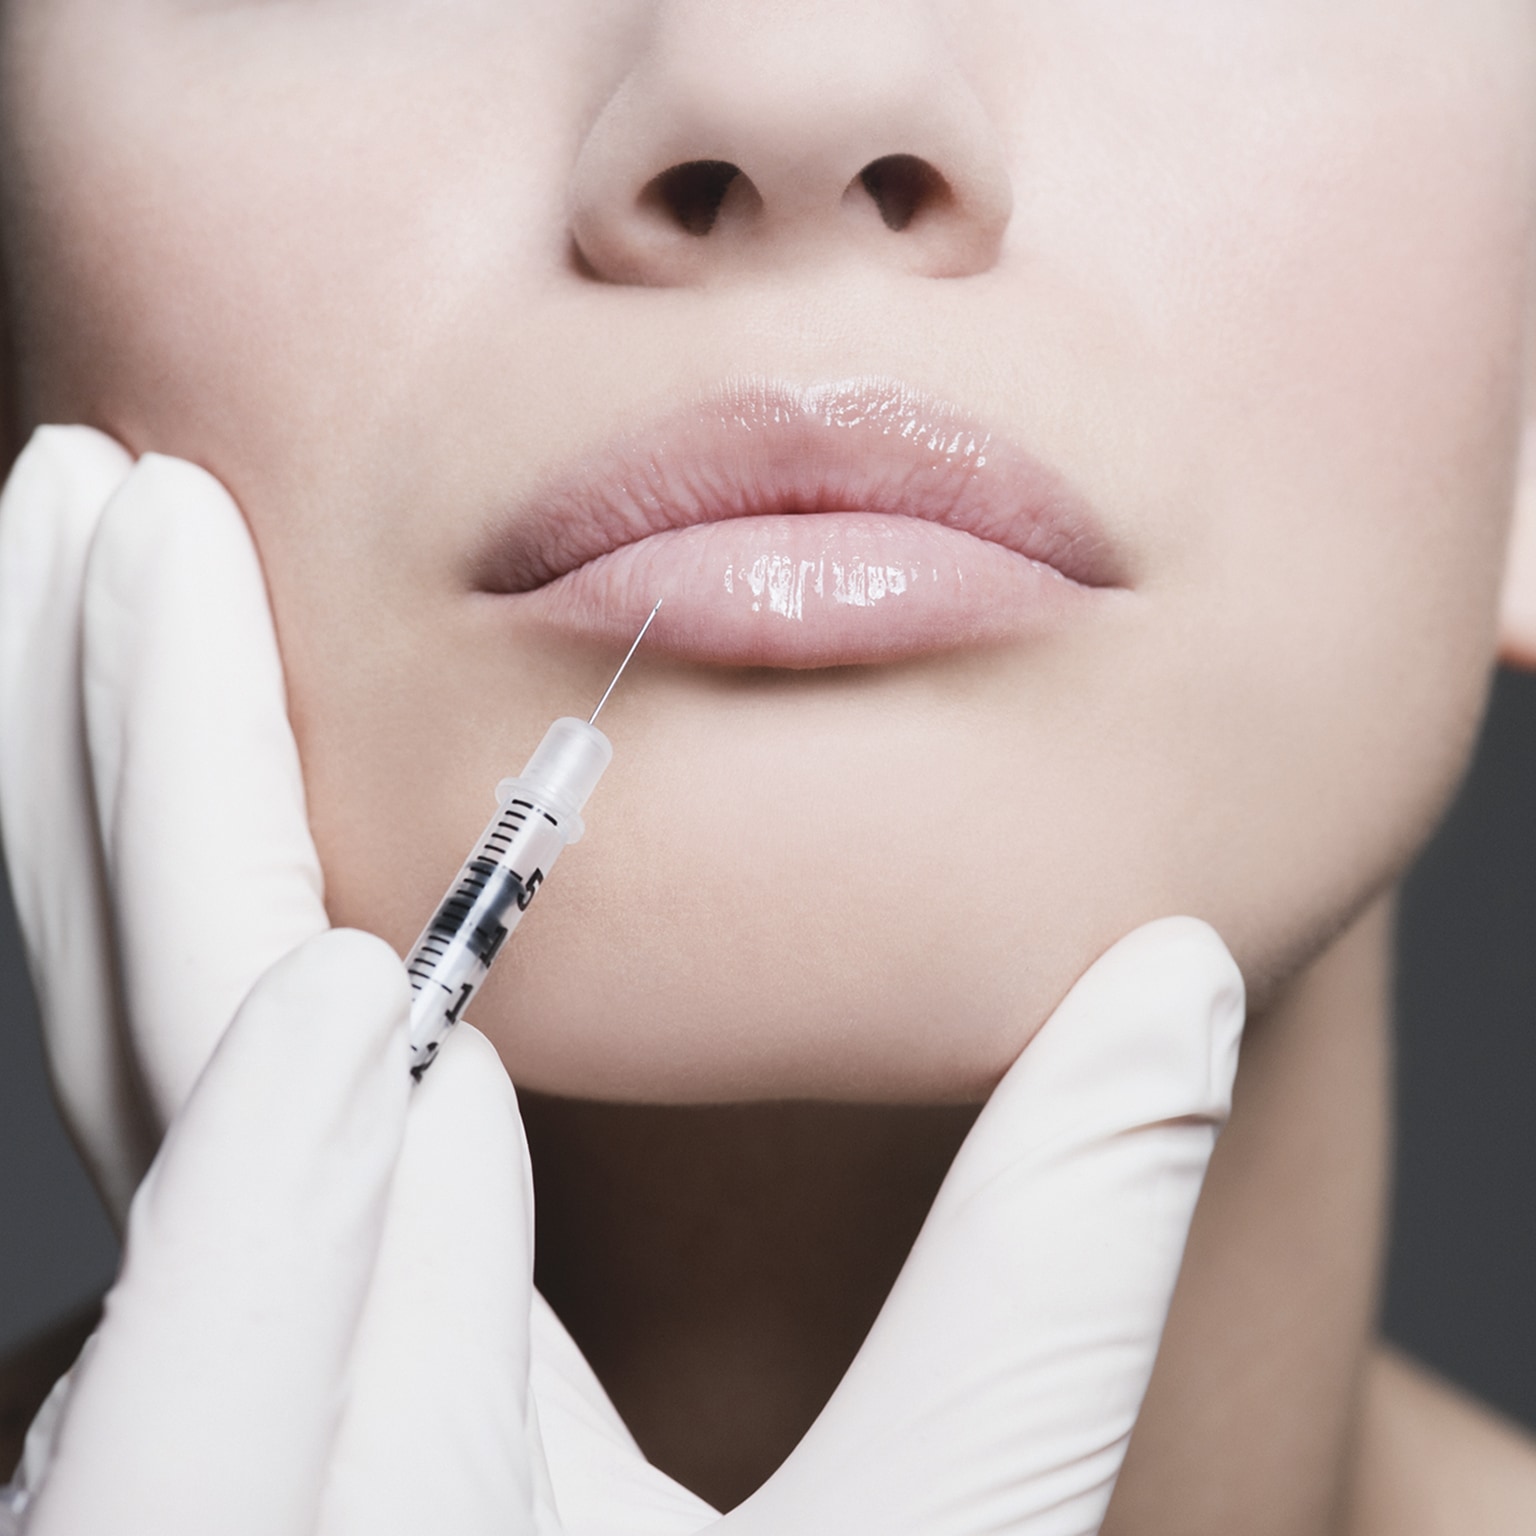 Mexico Became a Trending Venue for Aesthetic Treatments for Canadians